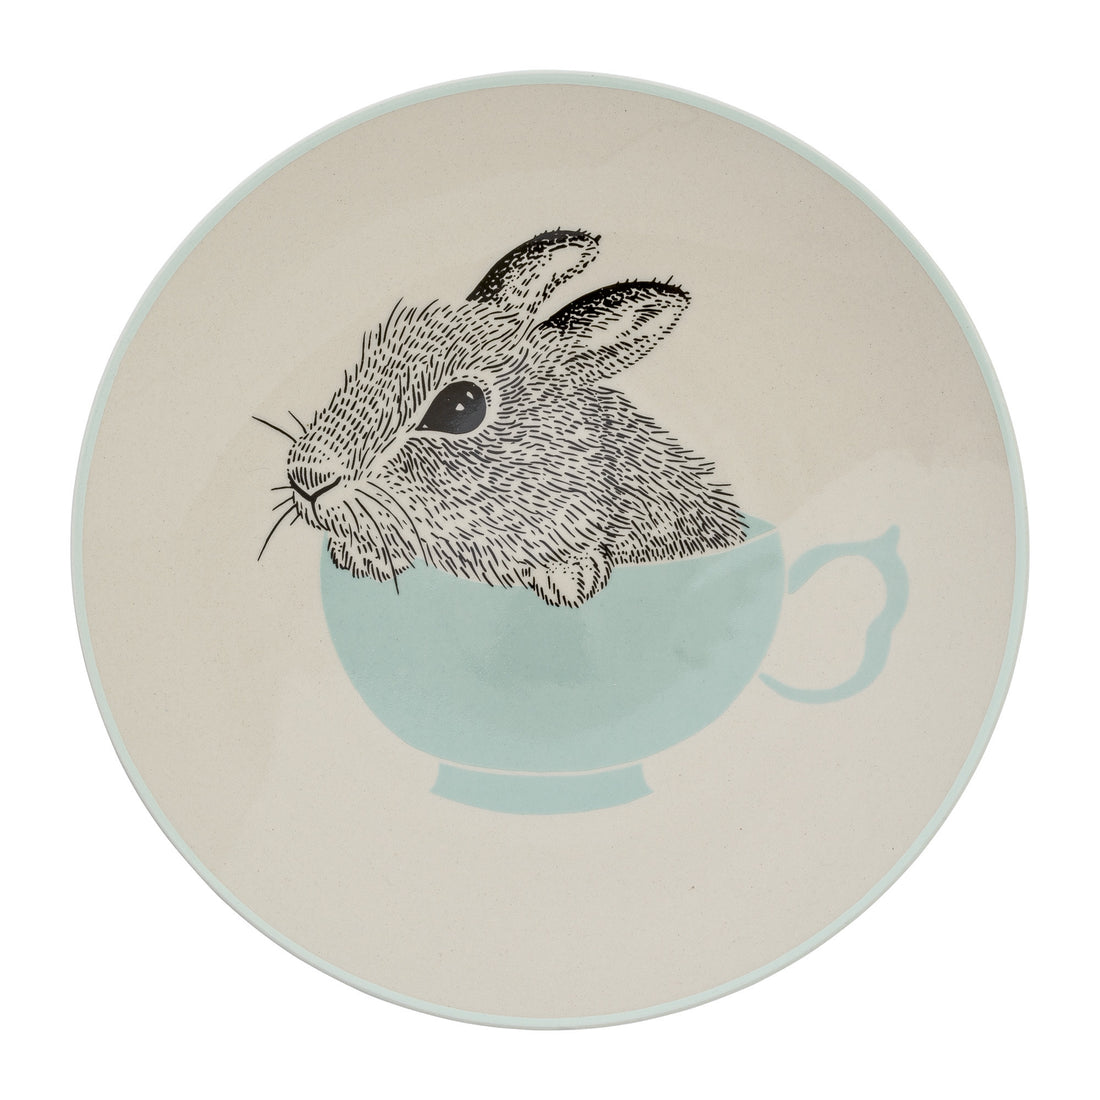 bloomingville-albert-offwhite-with-mint-plate-kitchen-bmv-21102449-01